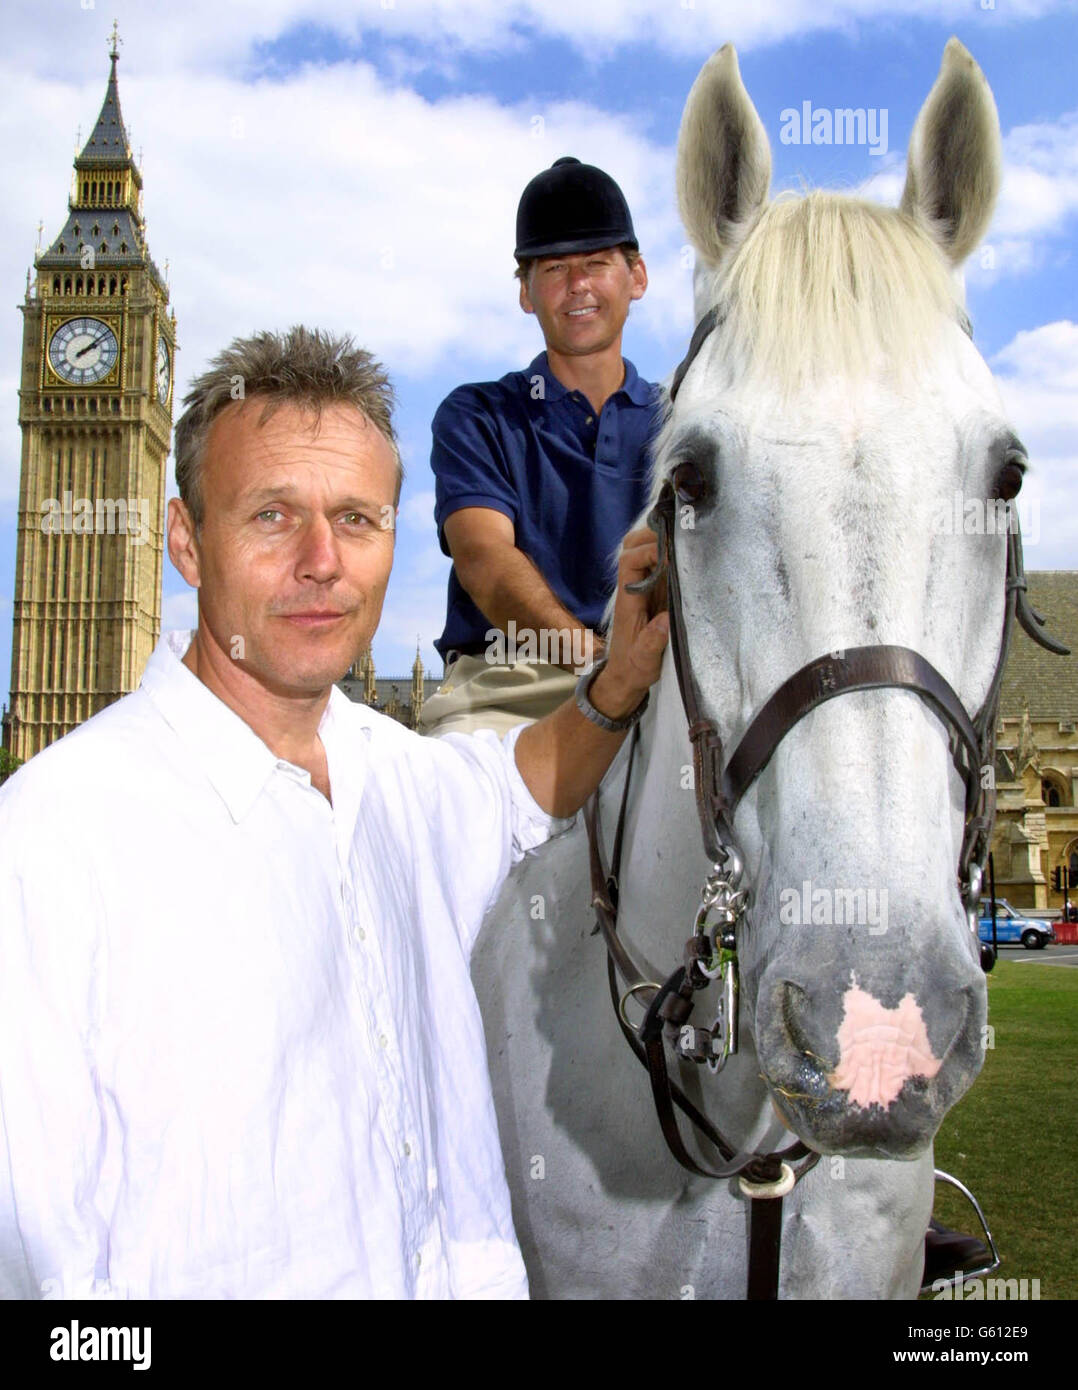 international dressage rider Emile Faurie with actor Anthony Head (L) during the last leg of International League for the Protection of Horses (ILPH) Transportation Awareness Ride in Parliament Square in central London. *...The long distance ride, which started from Kelso in Scotland on July 27, hopes to raise awareness of the apalling conditions in which 133,000 are transported across Europe for slaughter every year. Stock Photo